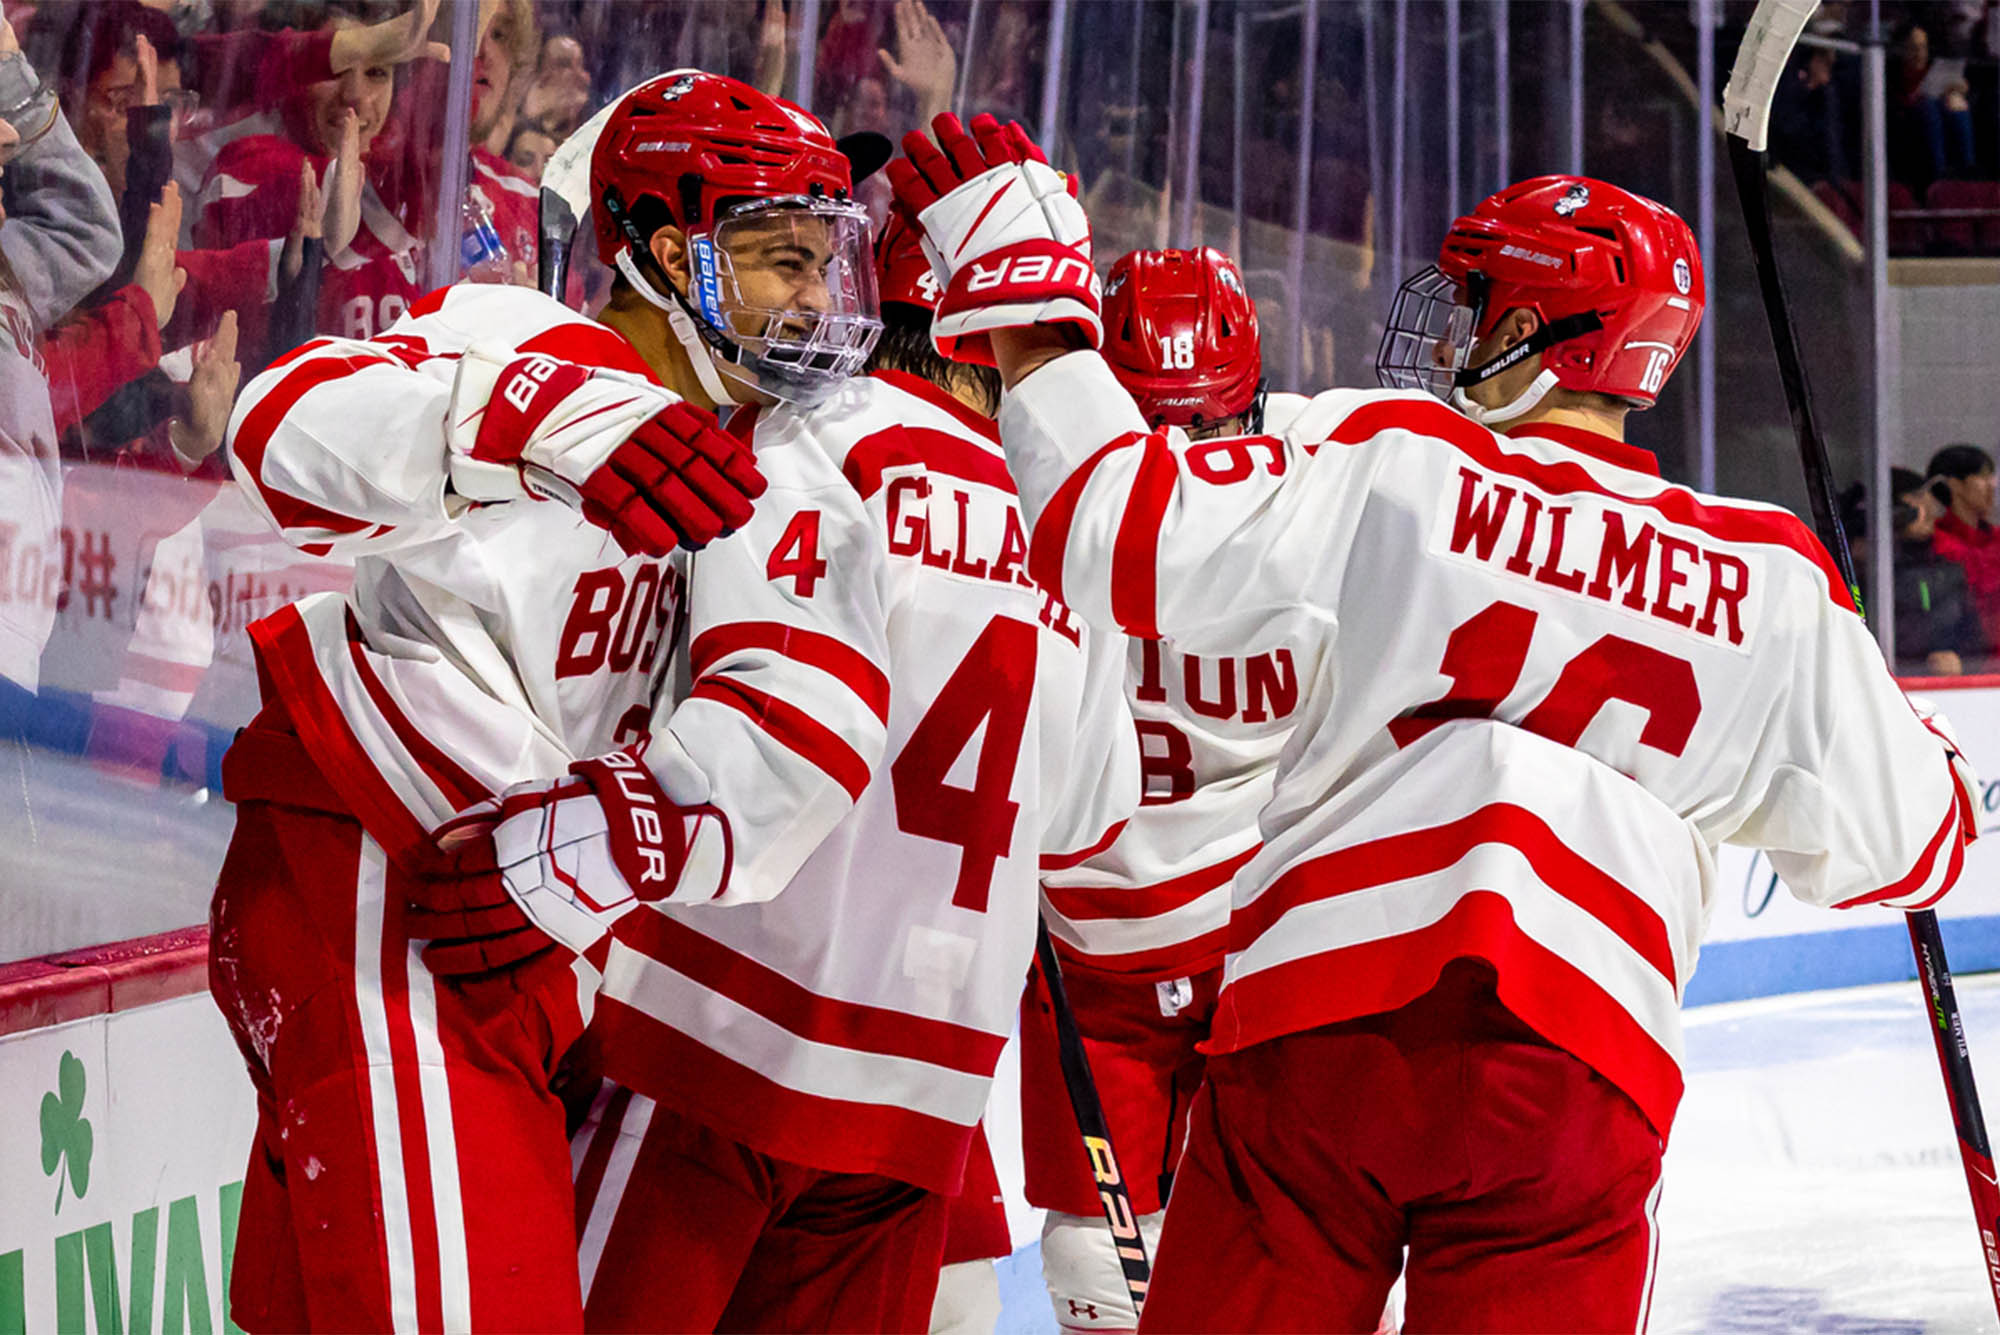 New Badgers on campus for men's hockey